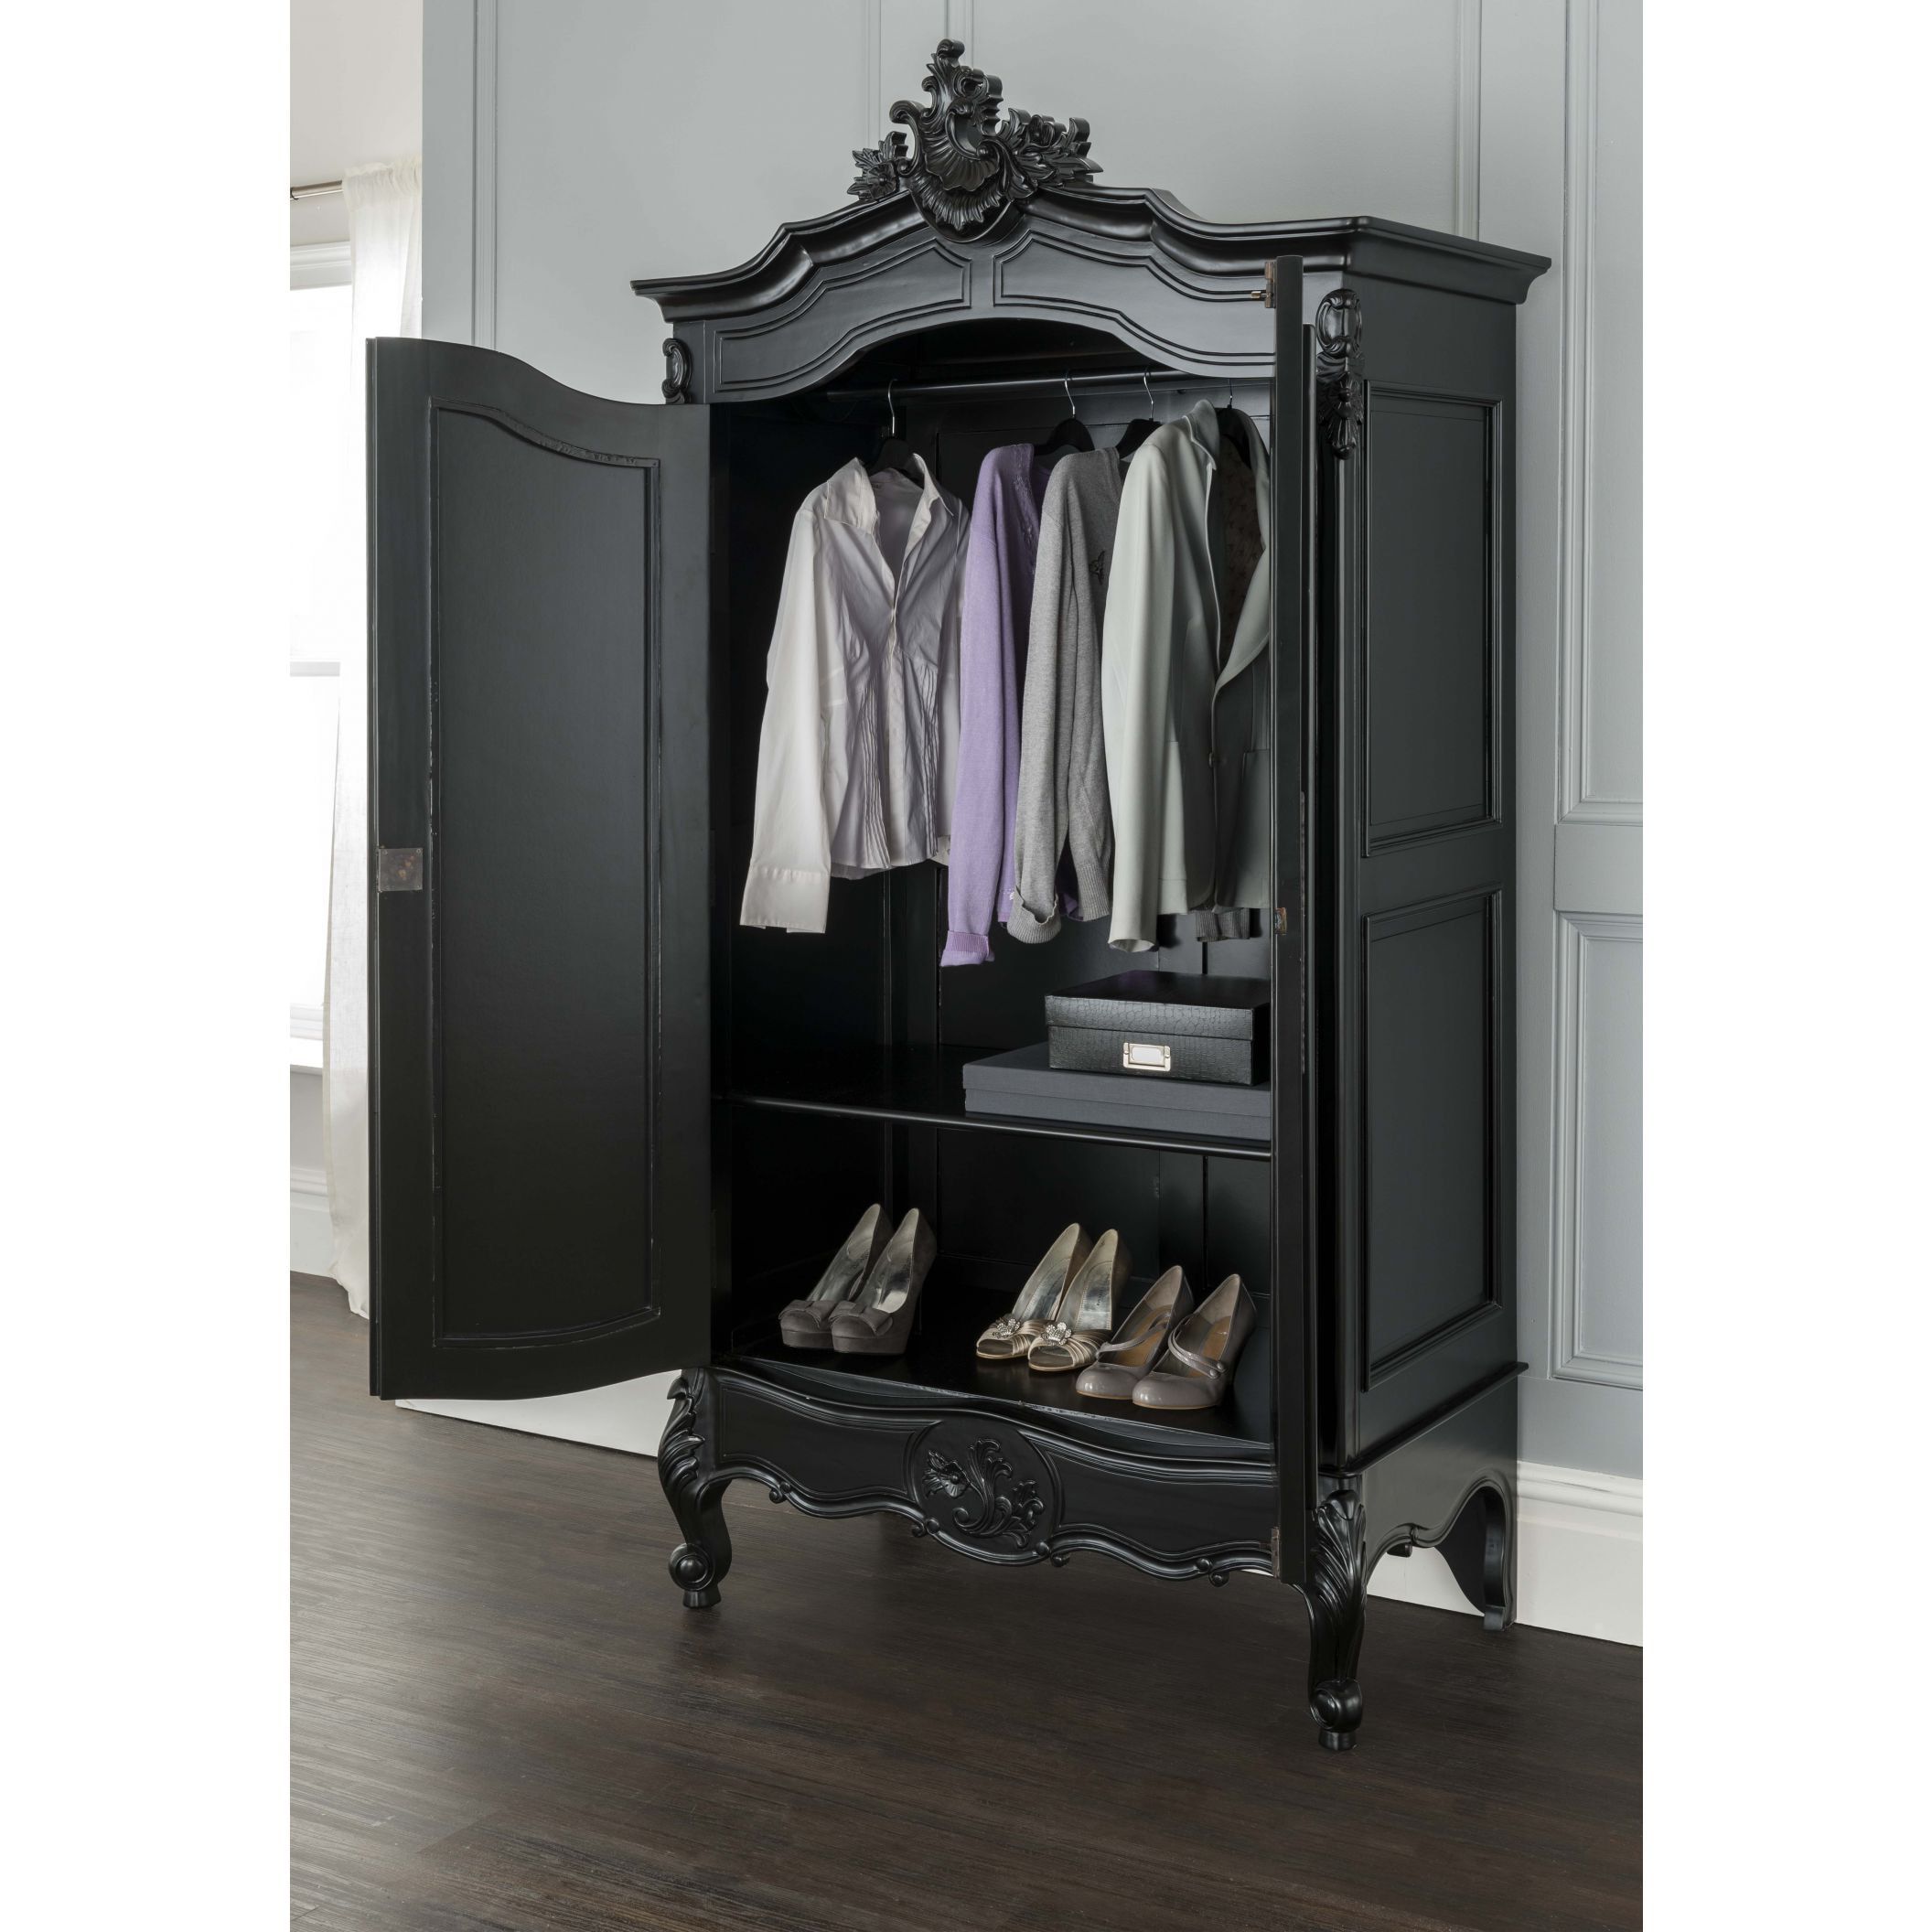 La Rochelle Antique French Wardrobe | Black Furniture Collection Pertaining To Black French Style Wardrobes (Gallery 11 of 20)